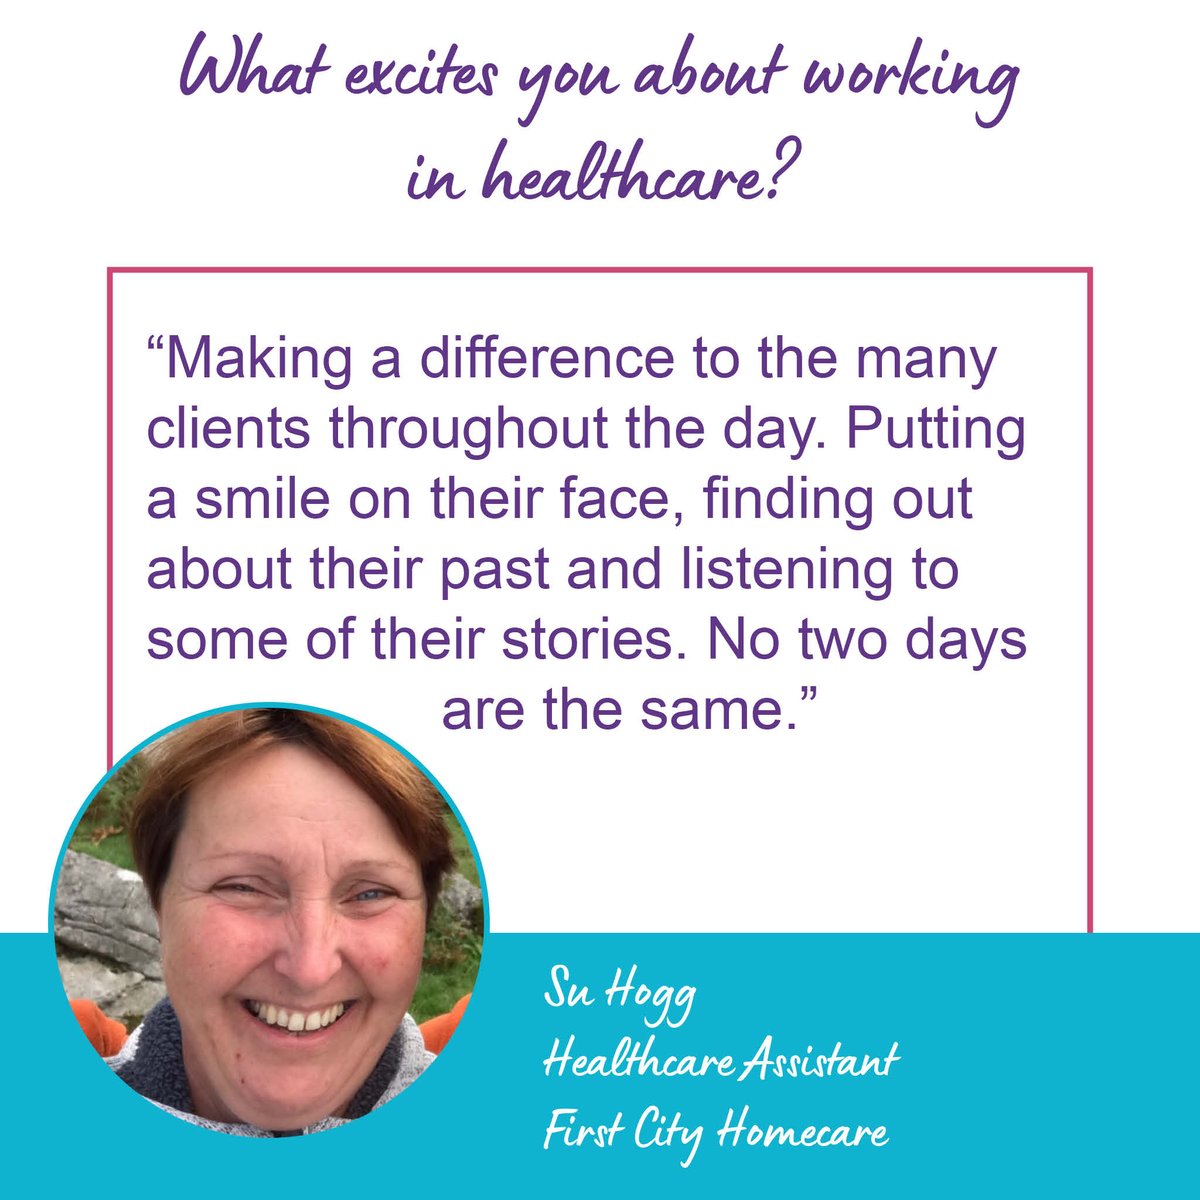 'Making a difference to the many clients throughout the day' - thank you for sharing your thoughts with us Su!

If you'd like to share your #firstcitystory please email charlotteg@firstcitygroup.co.uk 

#careerincare #carework #firstcityjourney #healthcarejourney #healthcare